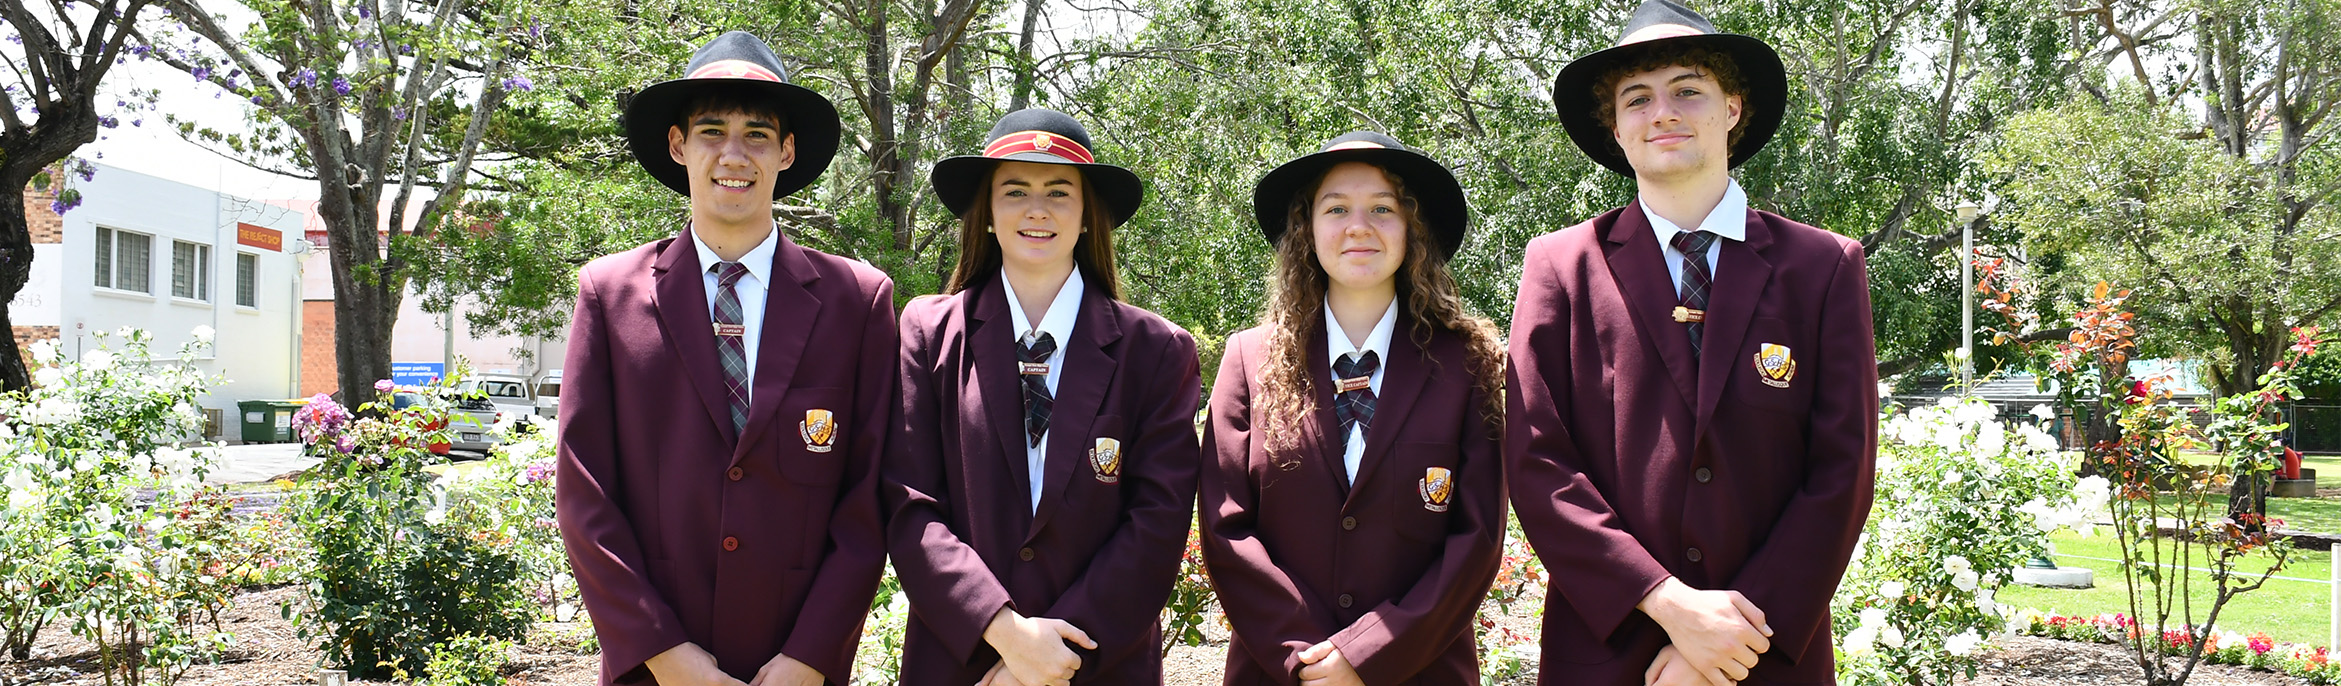 Gympie State High School students